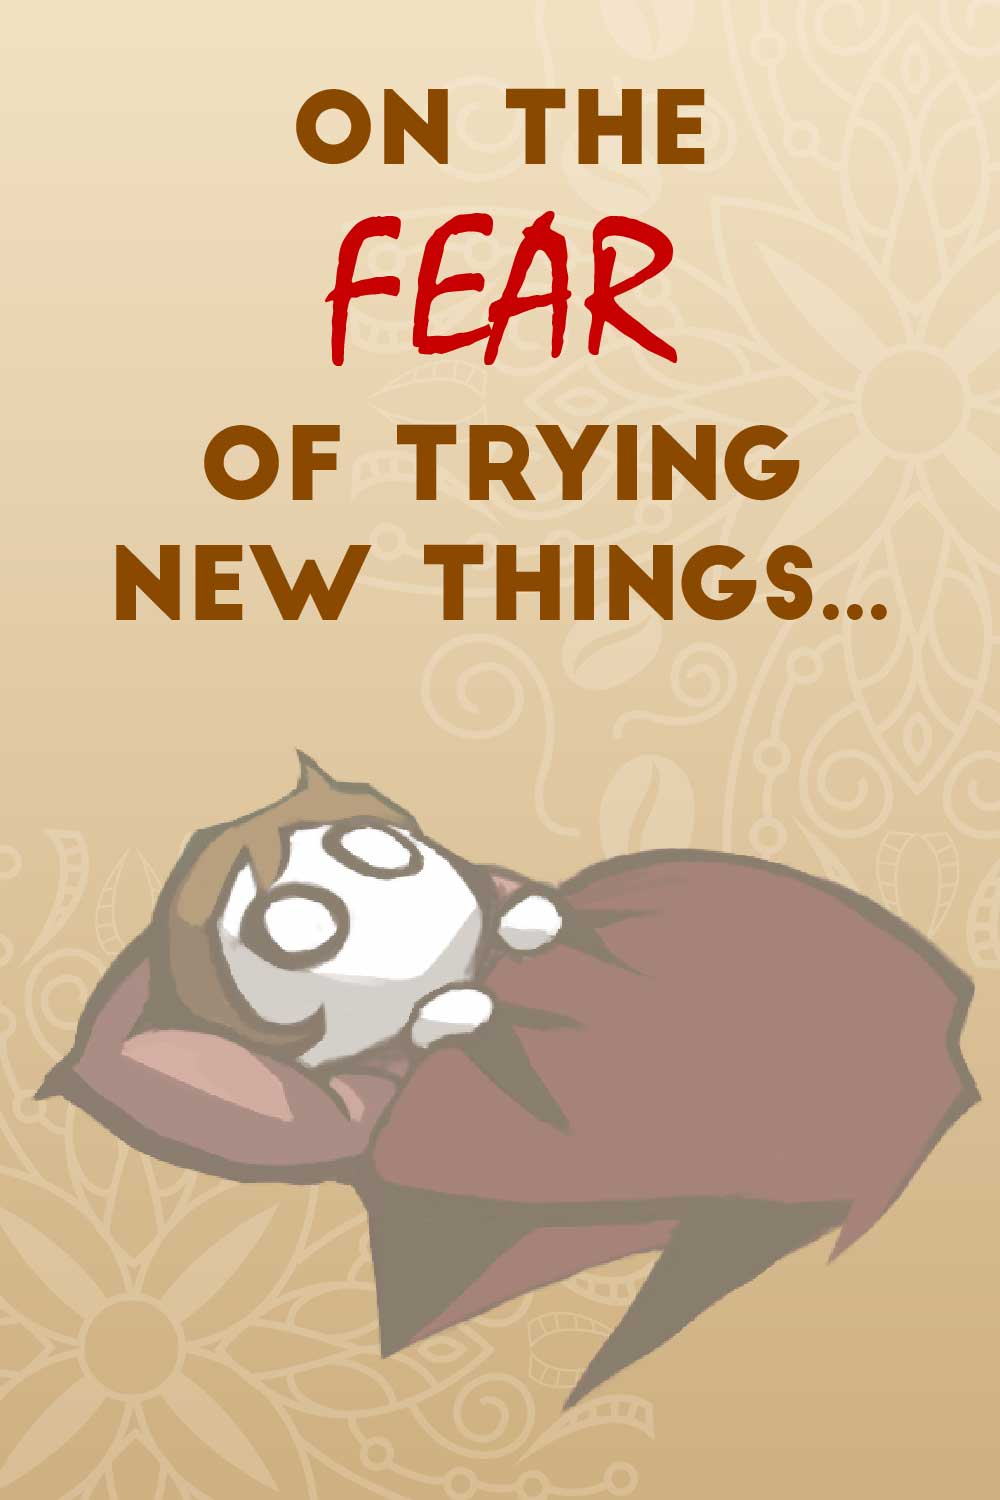 On the Fear of Trying New Things…